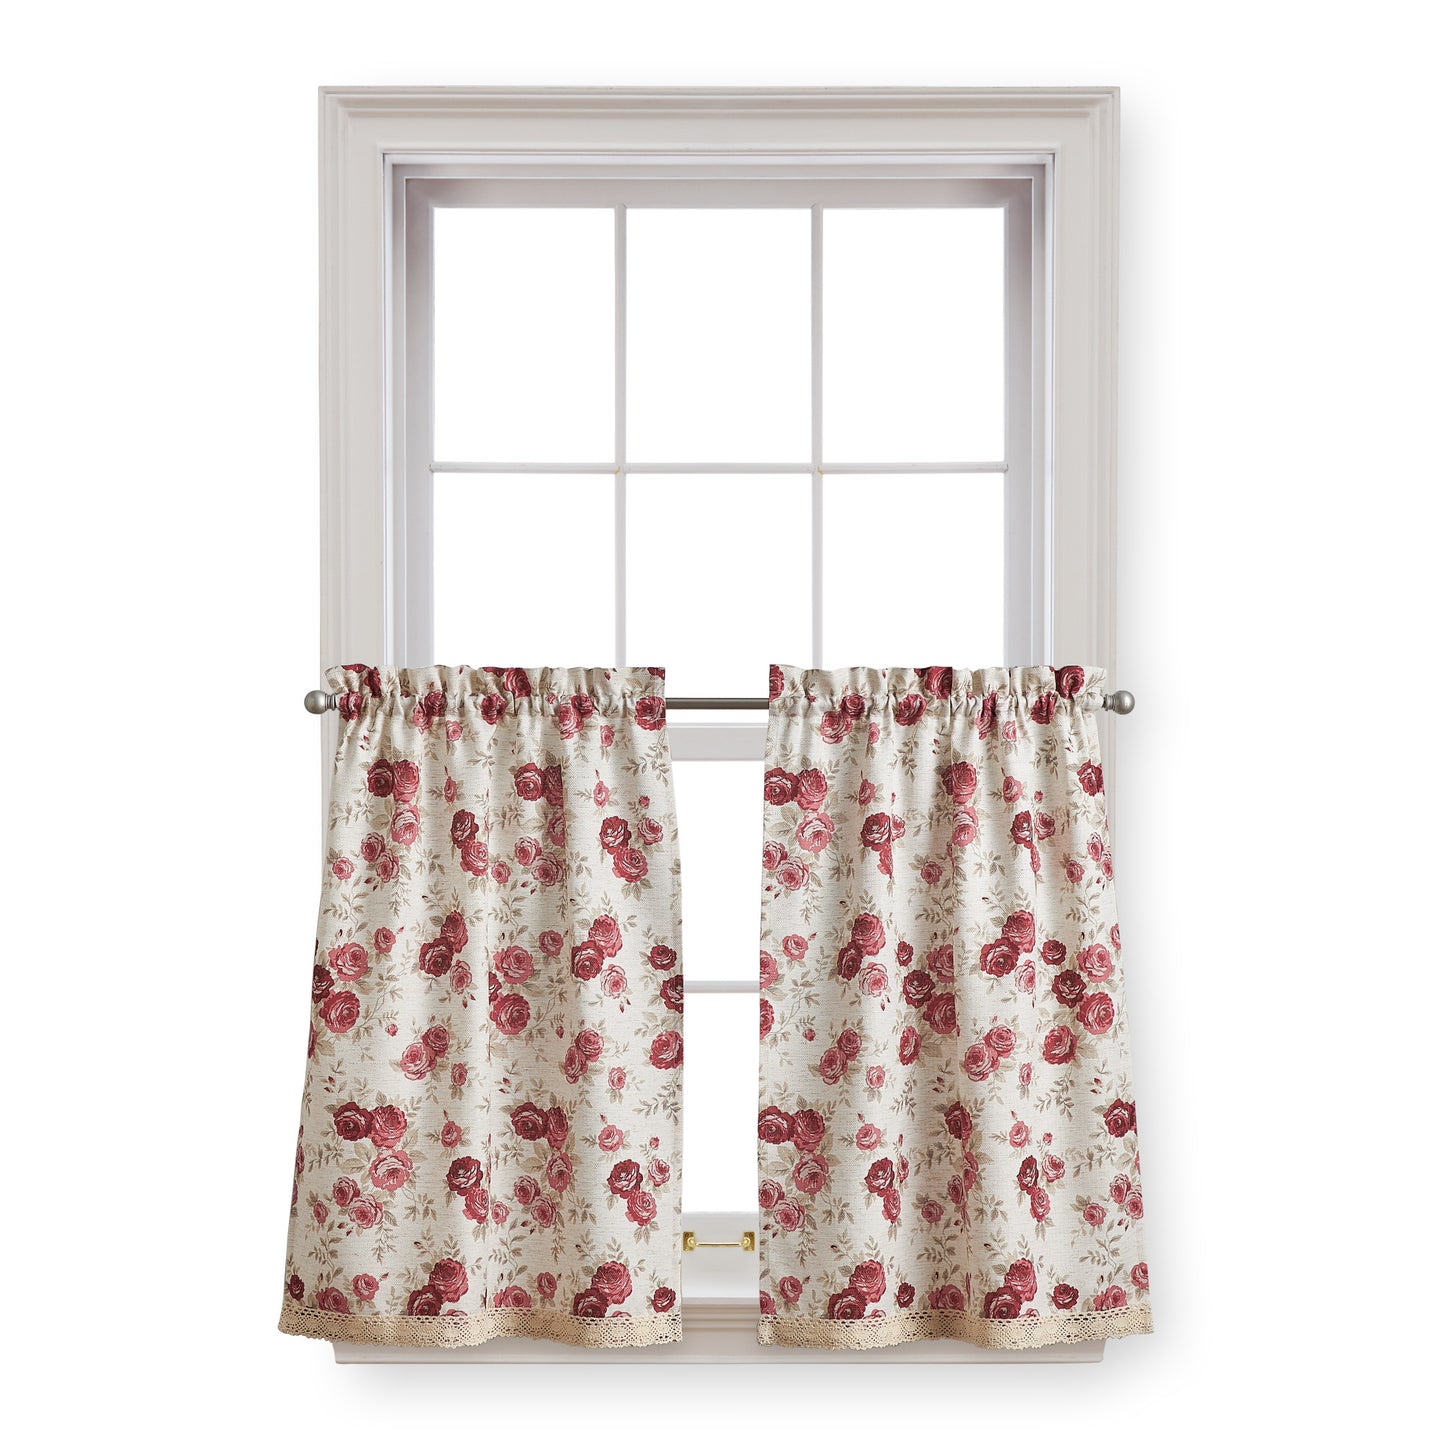 Curtainworks Antique Rose Valance and Tiers